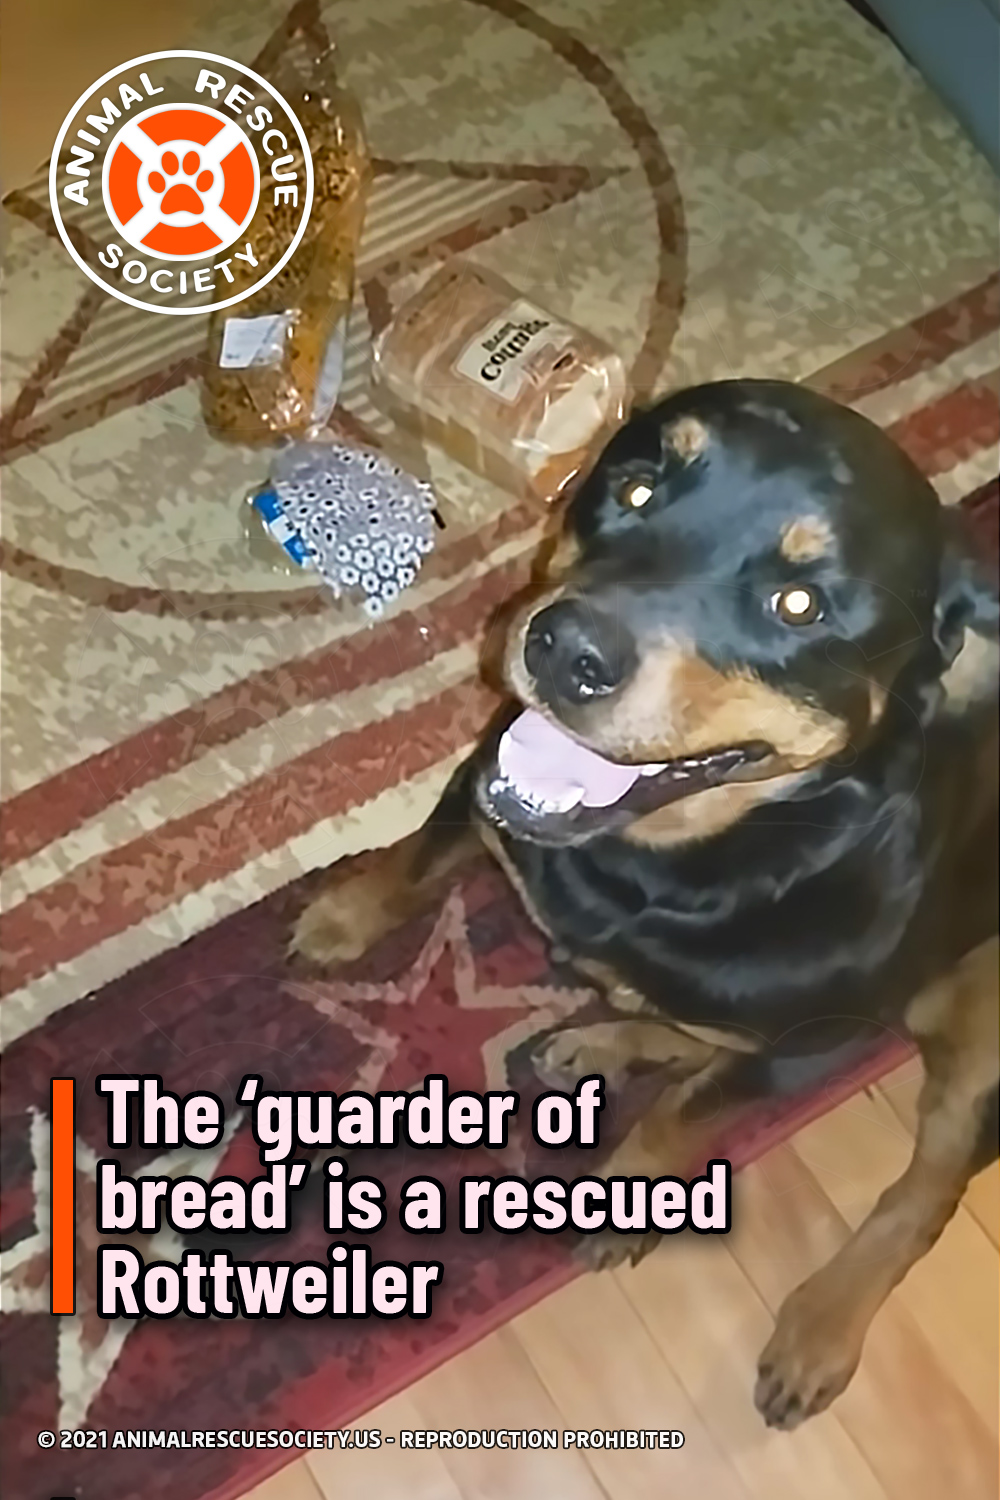 The ‘guarder of bread’ is a rescued Rottweiler